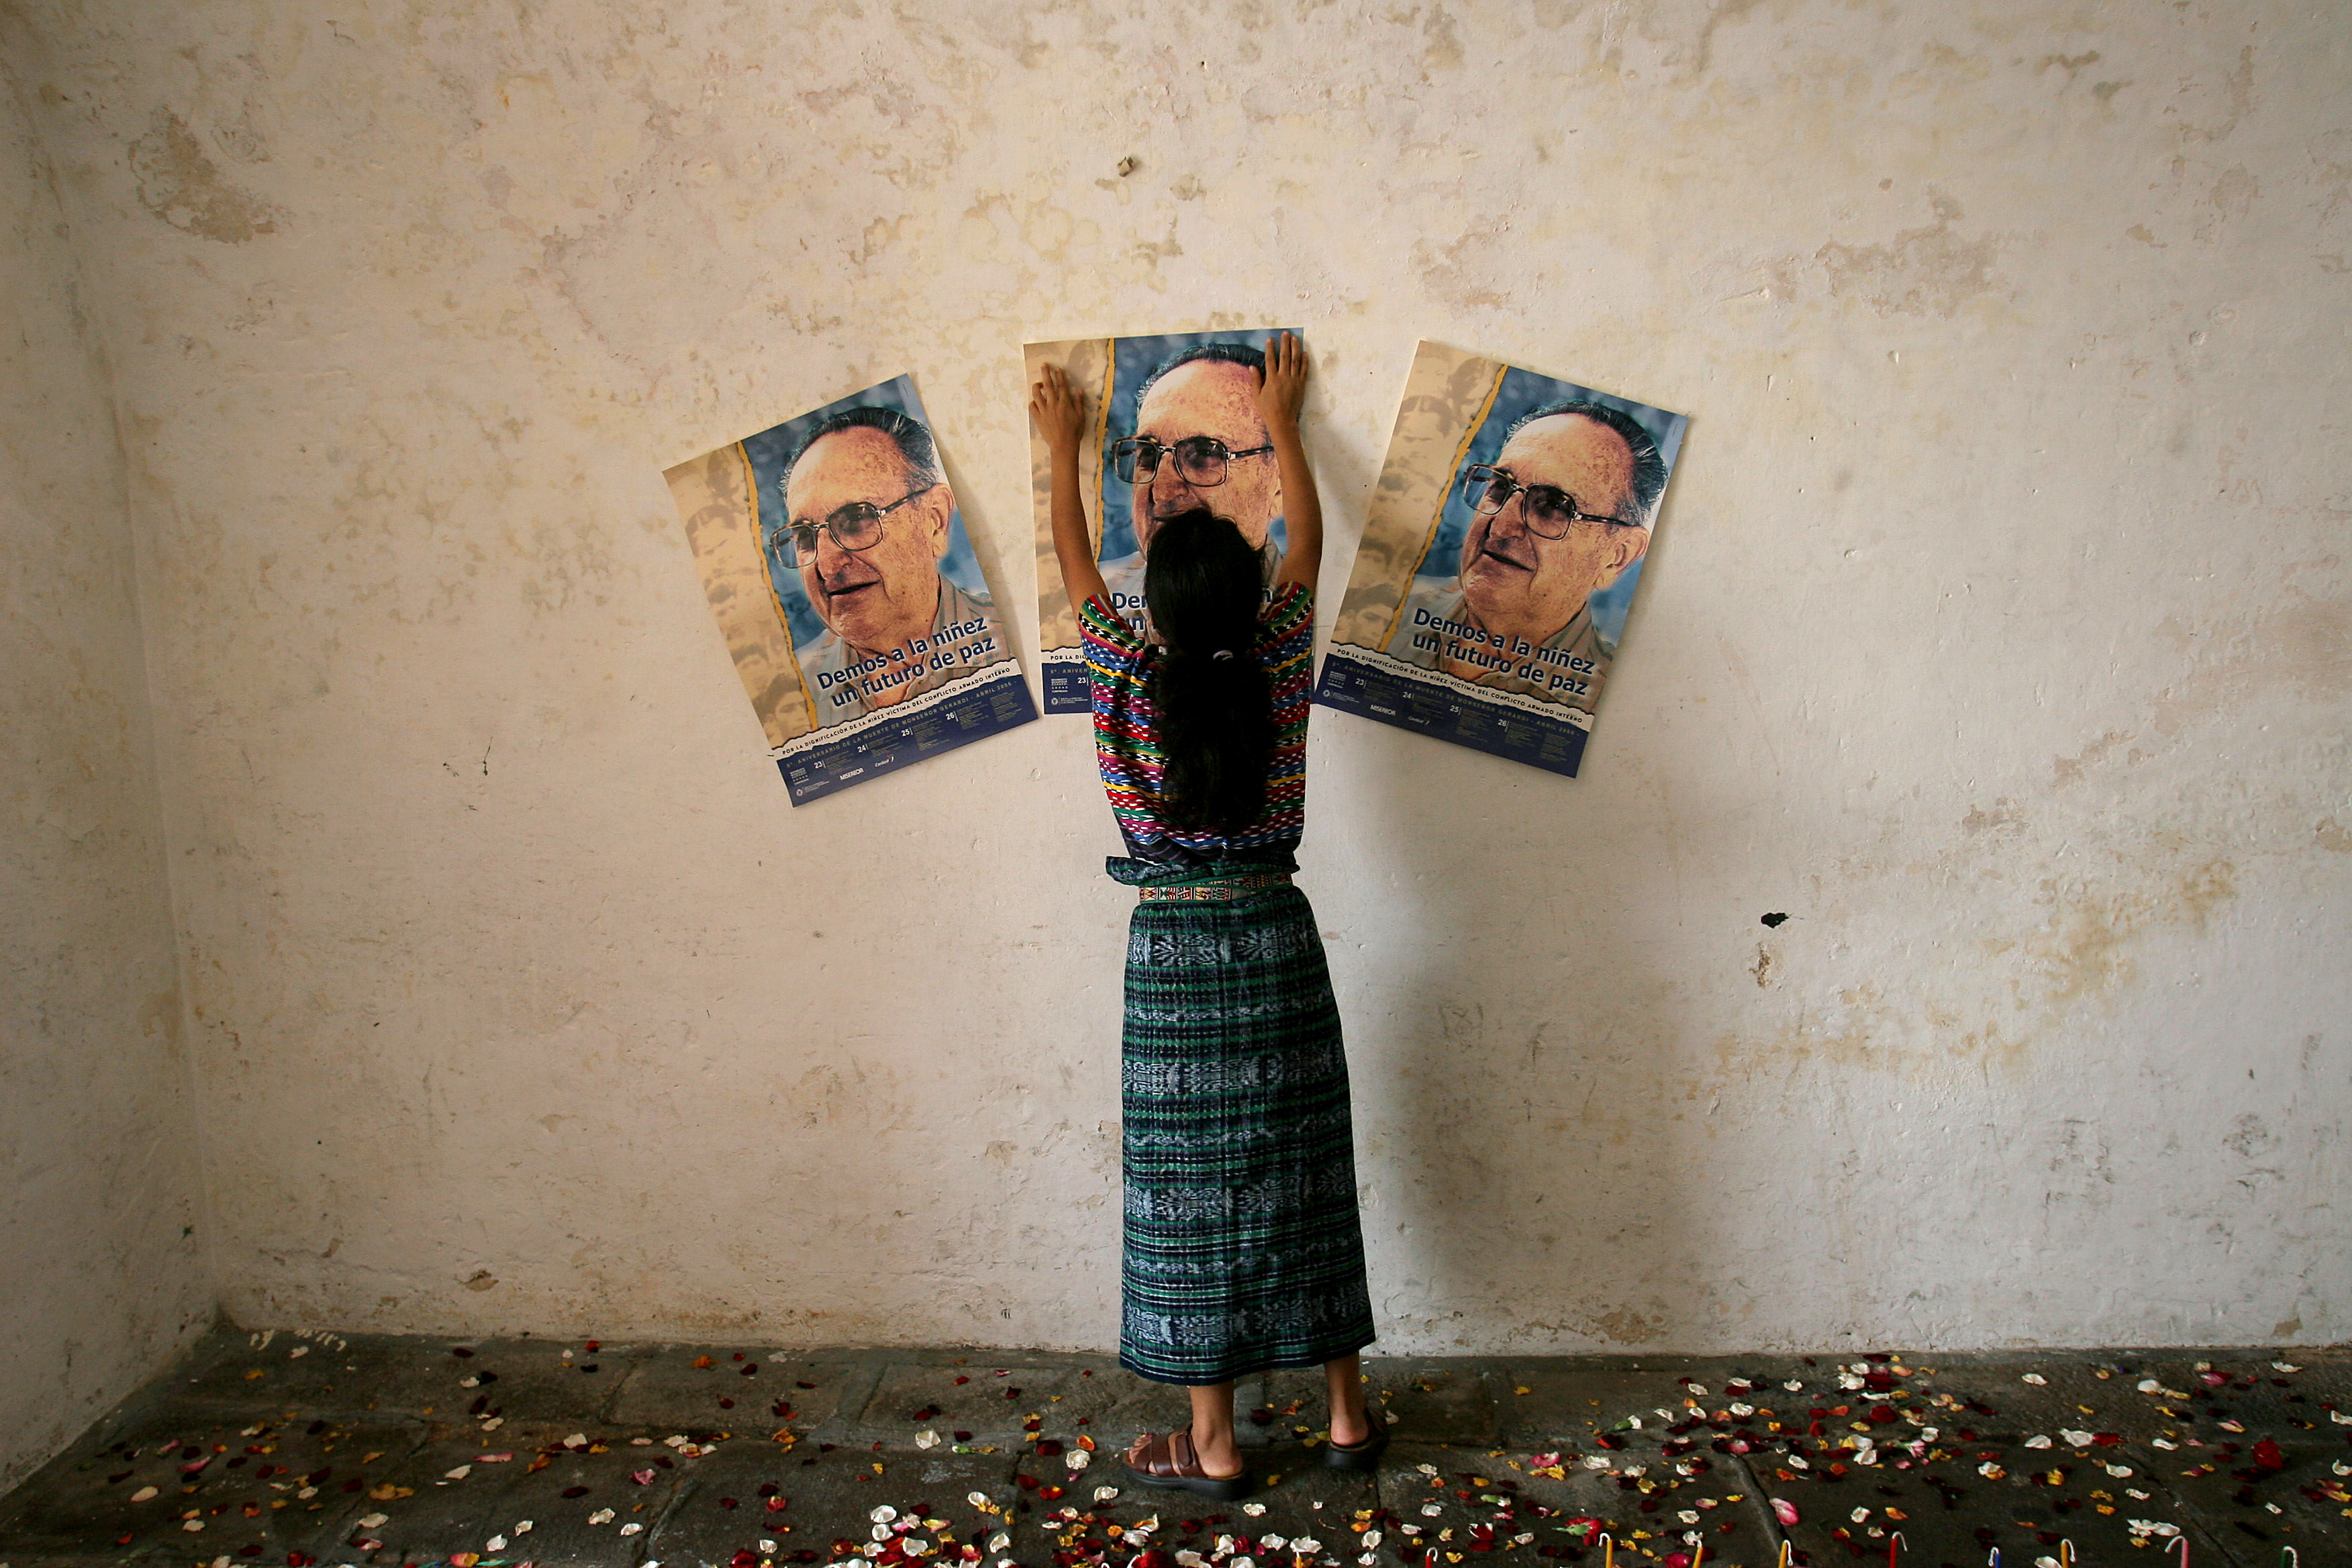 An indigenous woman places a poster of Bishop Juan Gerardi Conedera at a Catholic church in Guatemala City in April 2006 to mark the anniversary of his murder